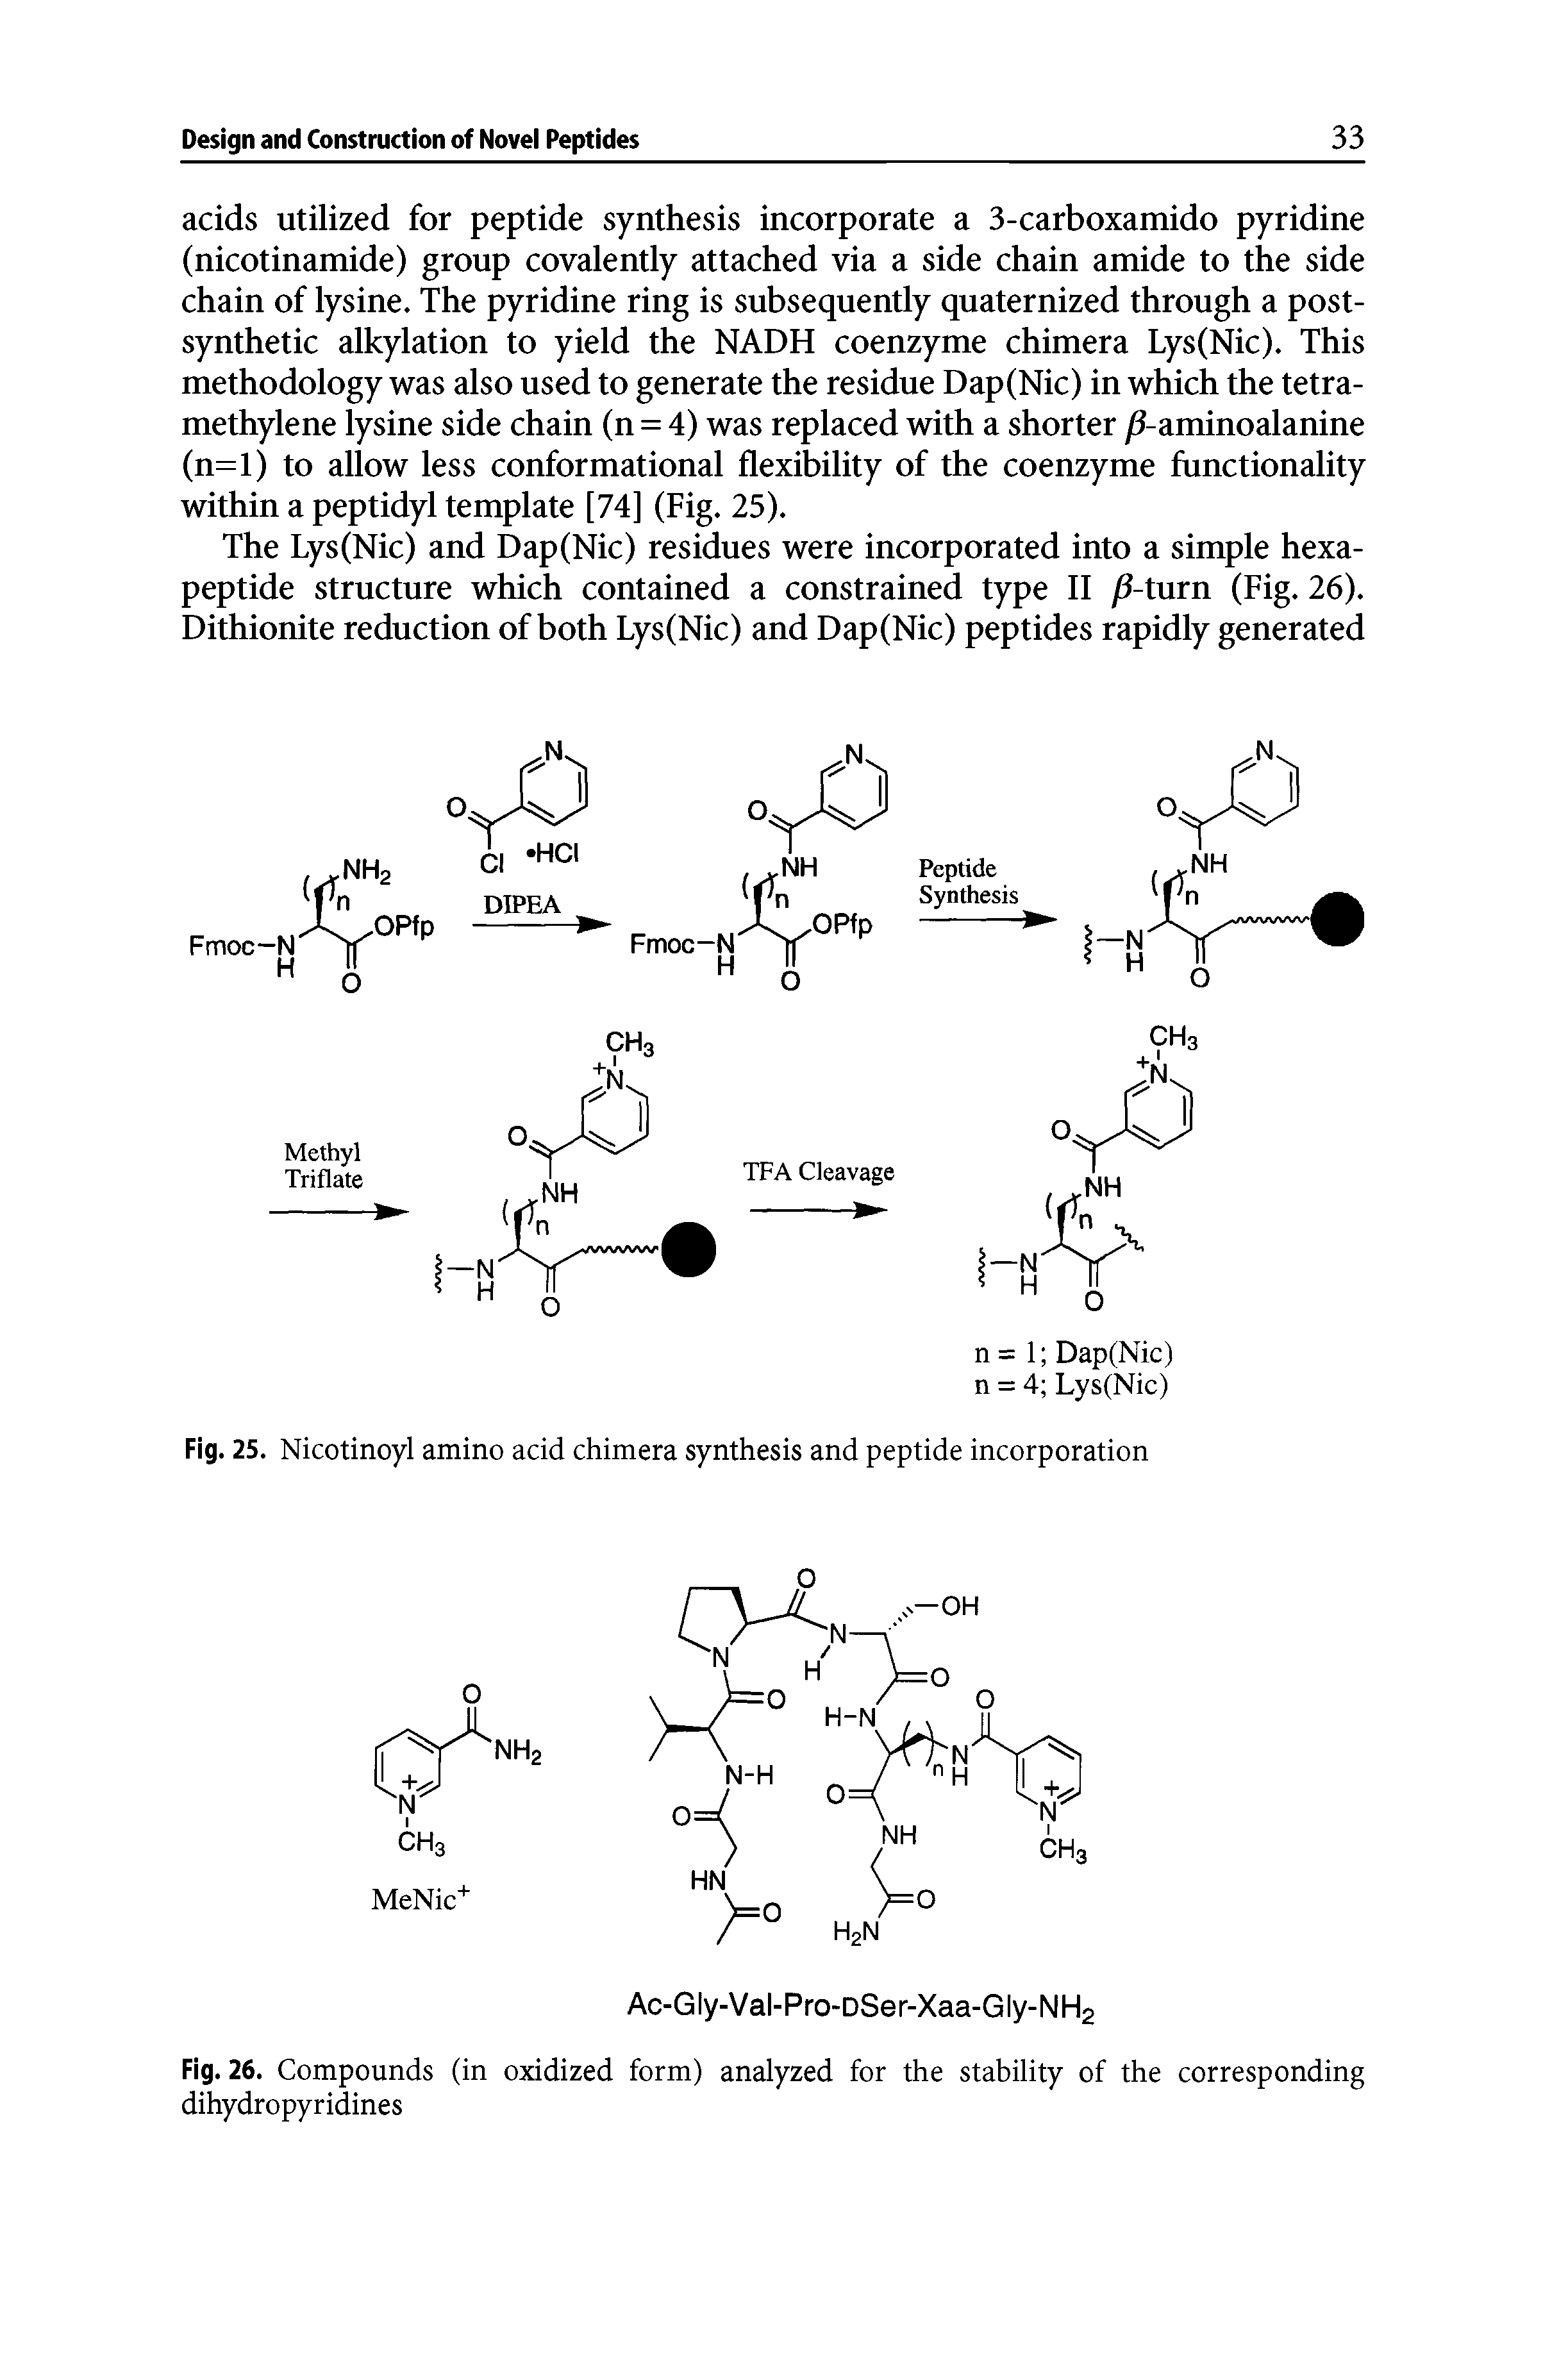 Fig. 26. Compounds (in oxidized form) analyzed for the stability of the corresponding dihydropyridines...